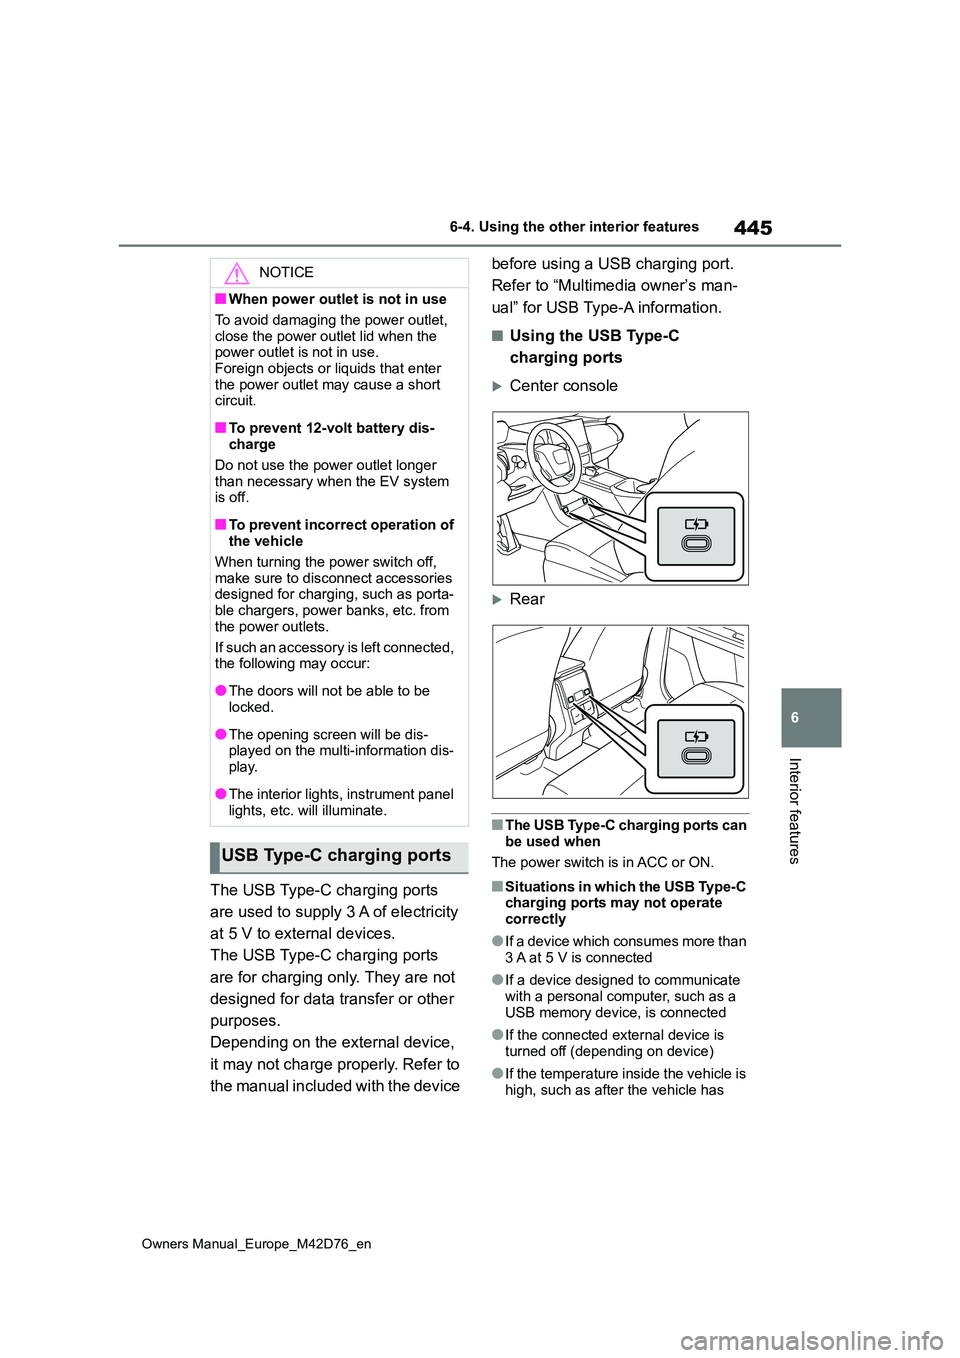 TOYOTA BZ4X 2022  Owners Manual (in English) 445
6
Owners Manual_Europe_M42D76_en
6-4. Using the other interior features
Interior features
The USB Type-C charging ports  
are used to supply 3 A of electricity  
at 5 V to external devices. 
The U